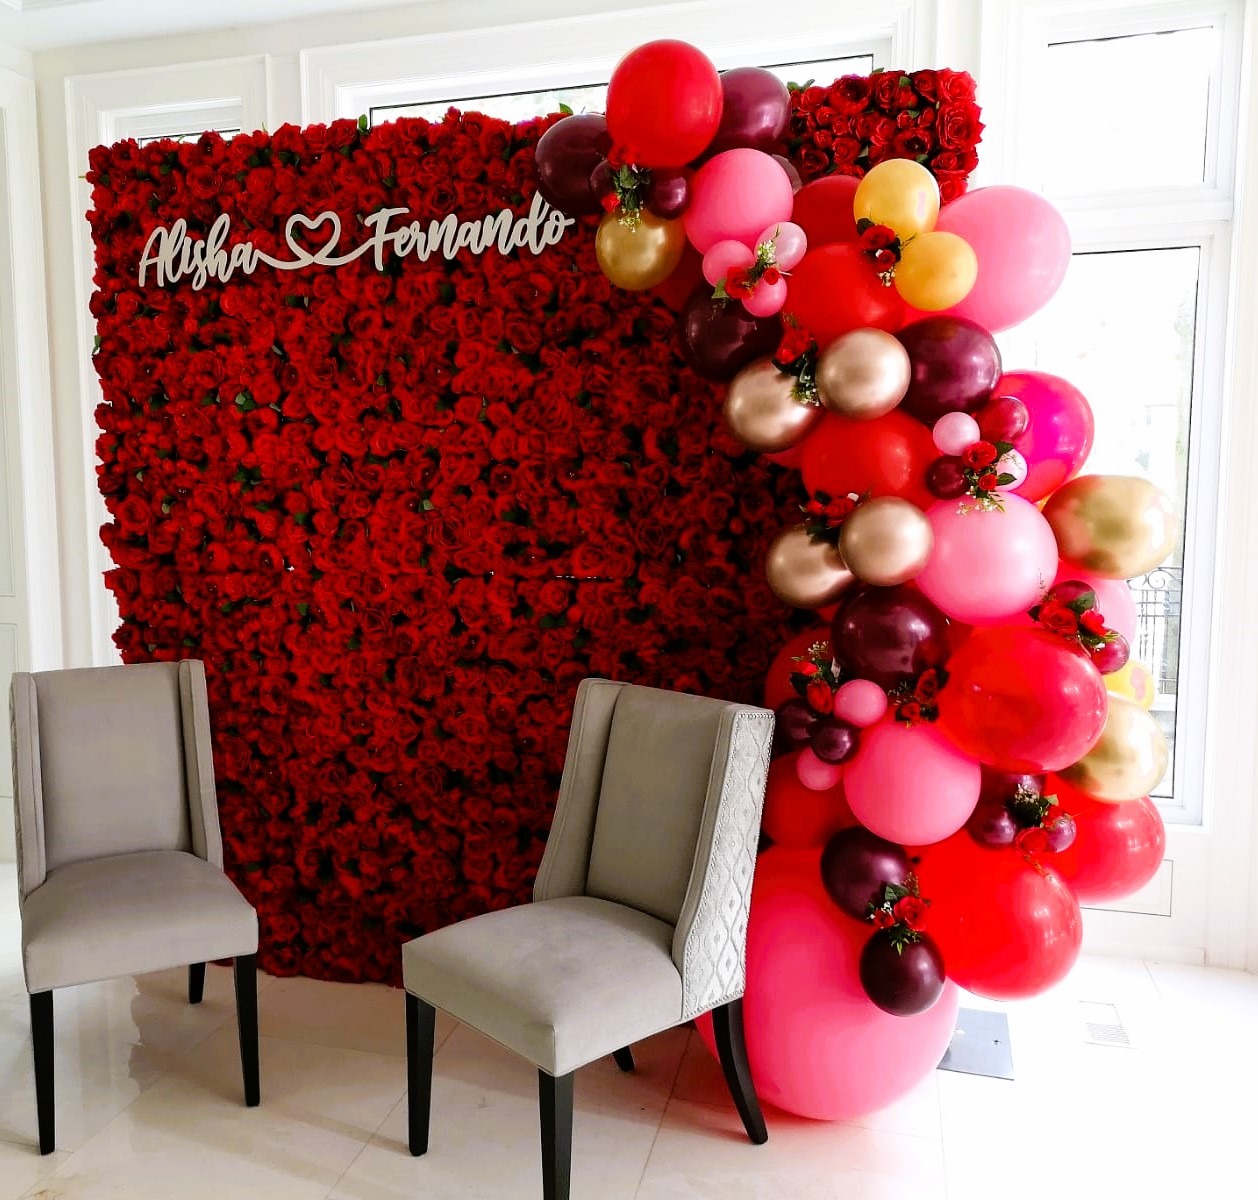 Niagara Falls Red Rose Flower Wall Backdrop for Your Bridal Shower